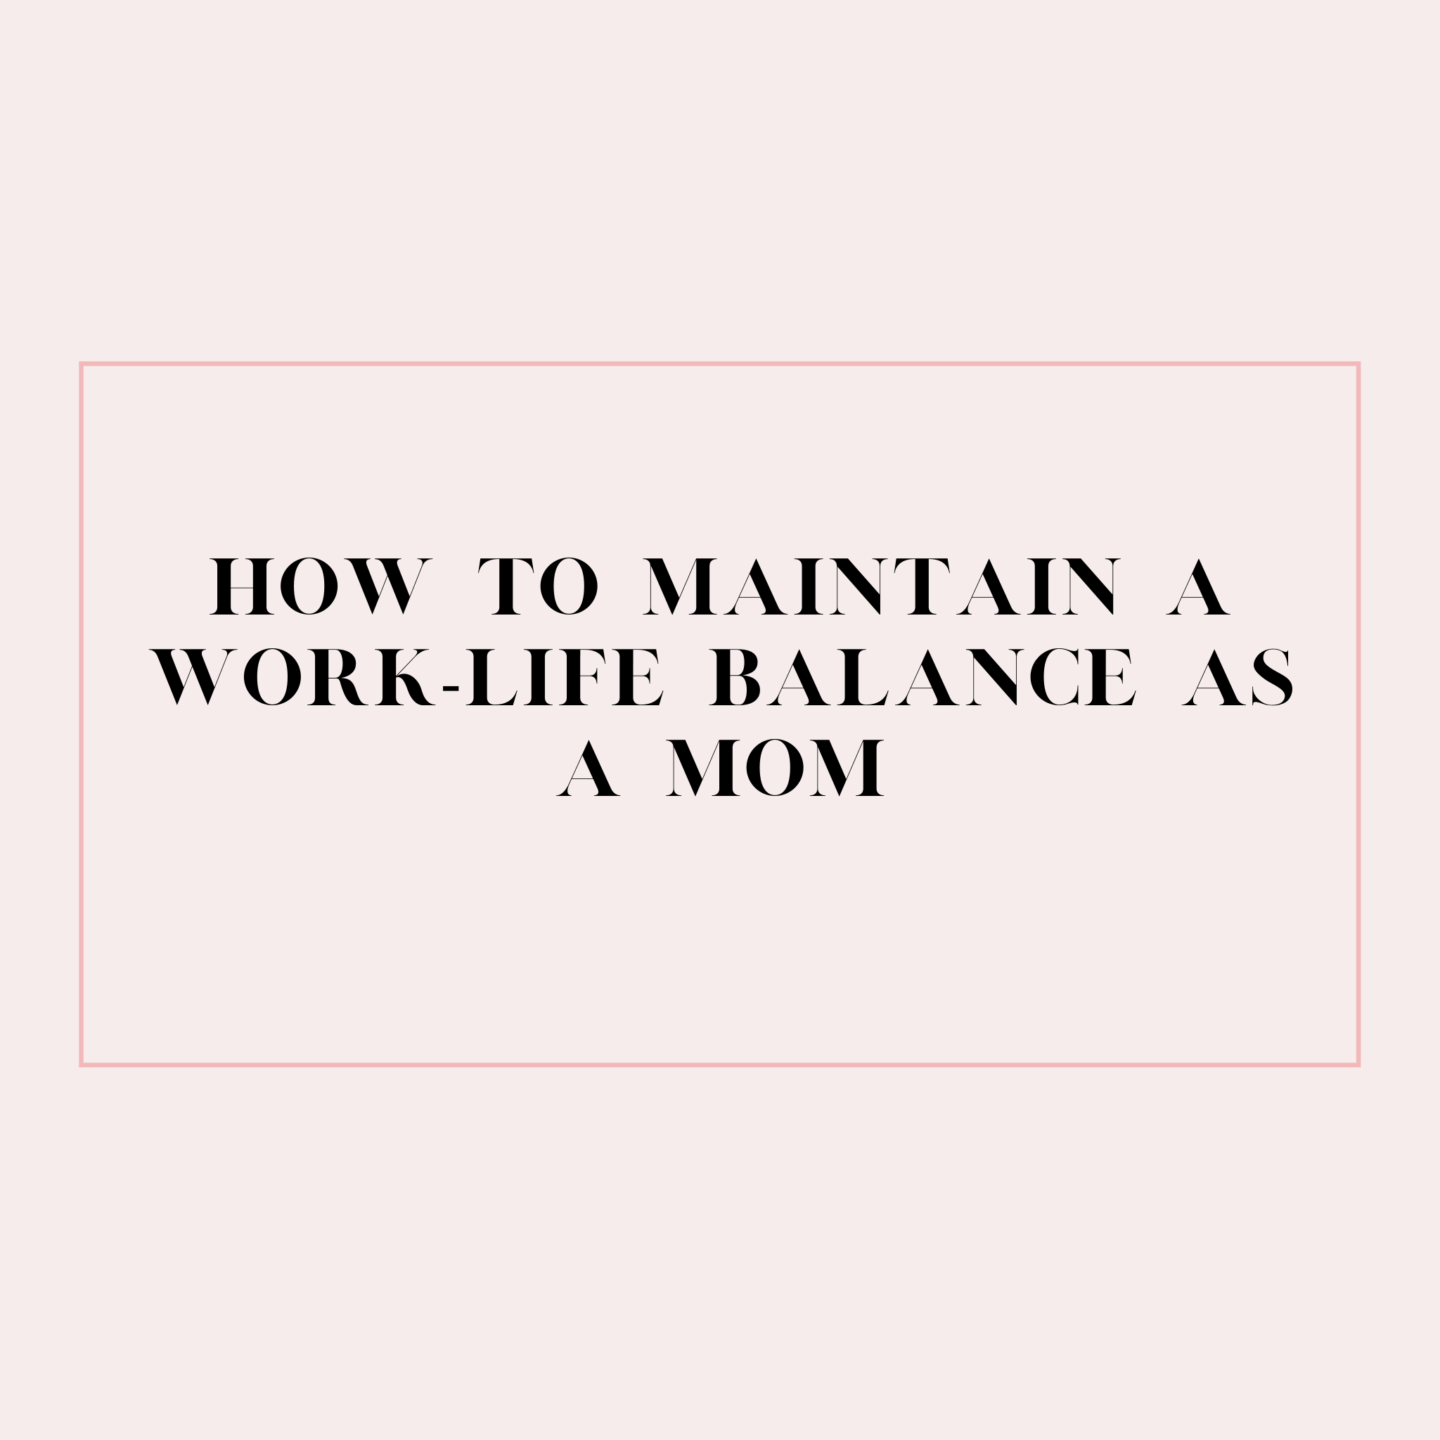 How I Started Finding a Work-Life Balance as a Mom